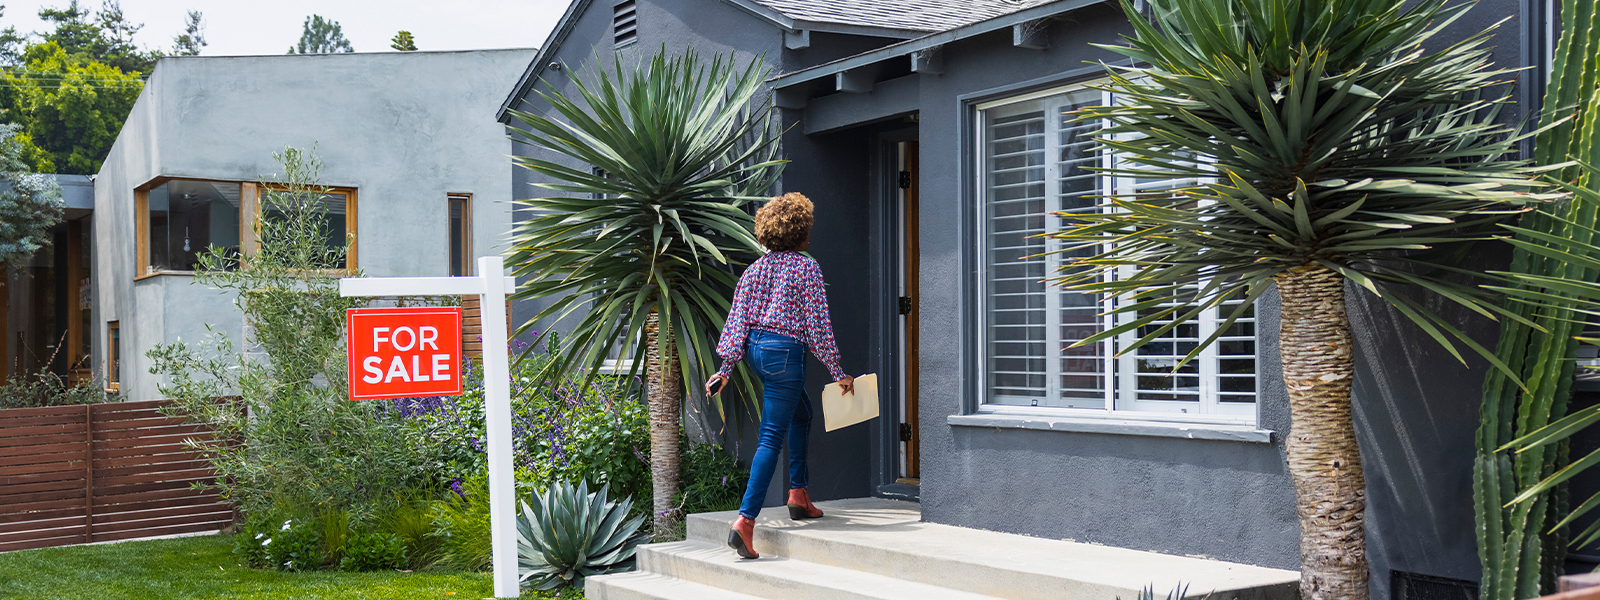 Woman walking past a "for sale" sign and into a house. She has a folder in her hand to help her through the home buying process.